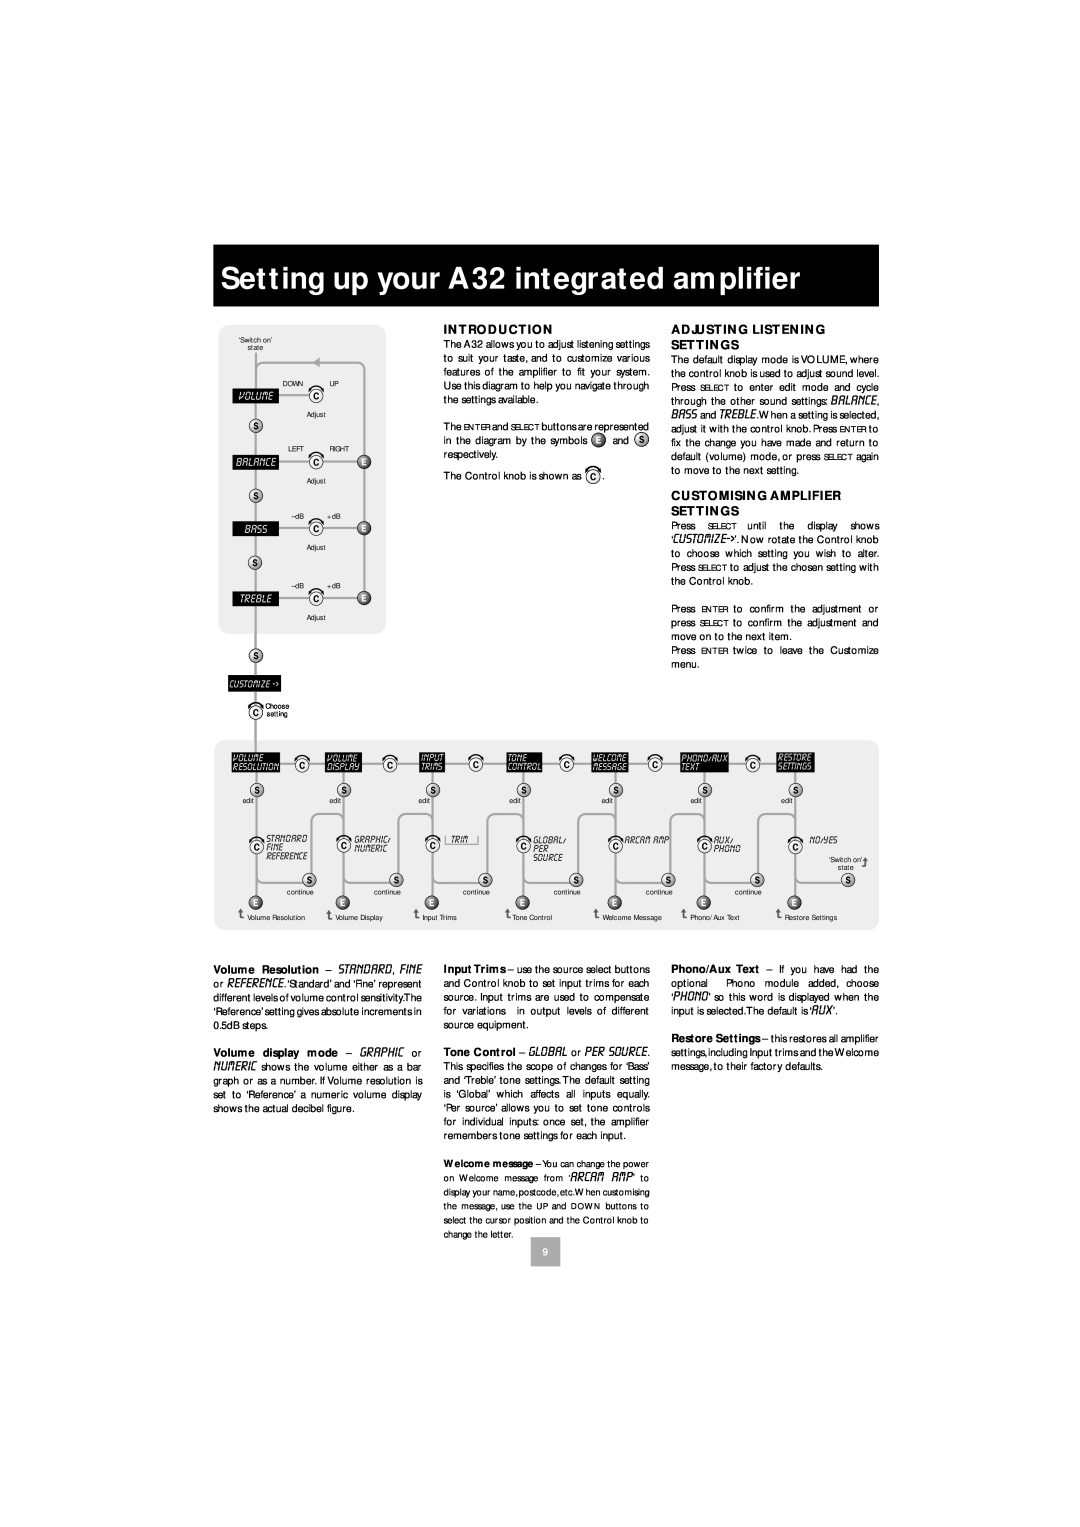 Arcam P35 manual Setting up your A32 integrated ampliﬁer, Introduction, Adjusting Listening Settings 